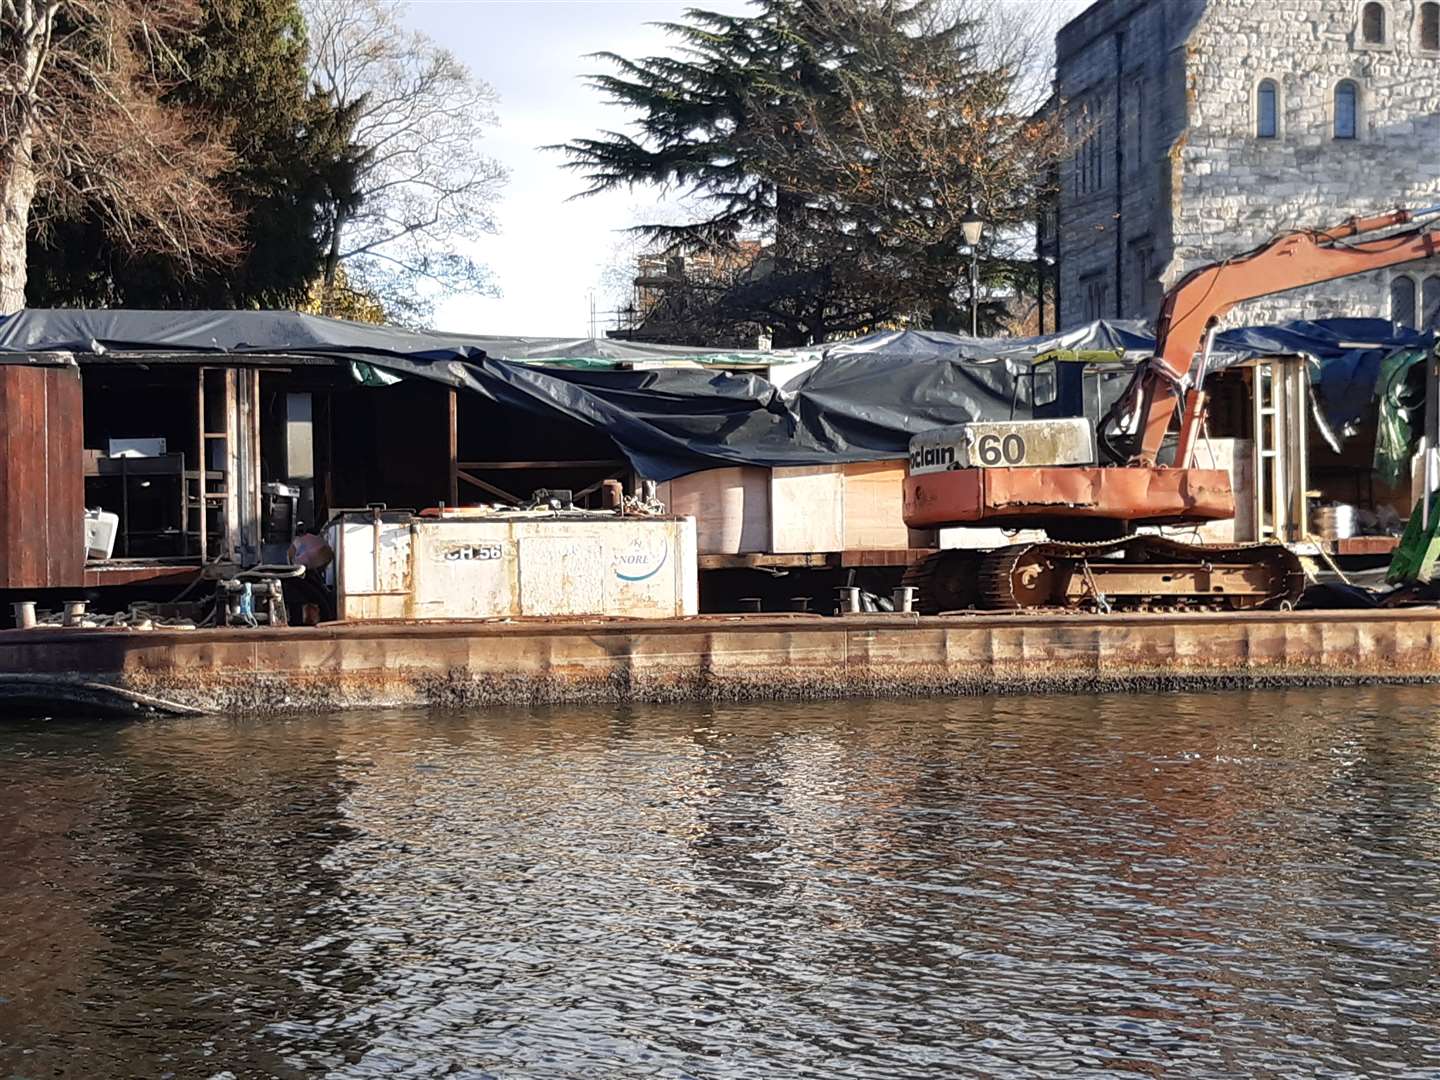 Work to tow the Embankments bar and restaurant barge in Maidstone is underway